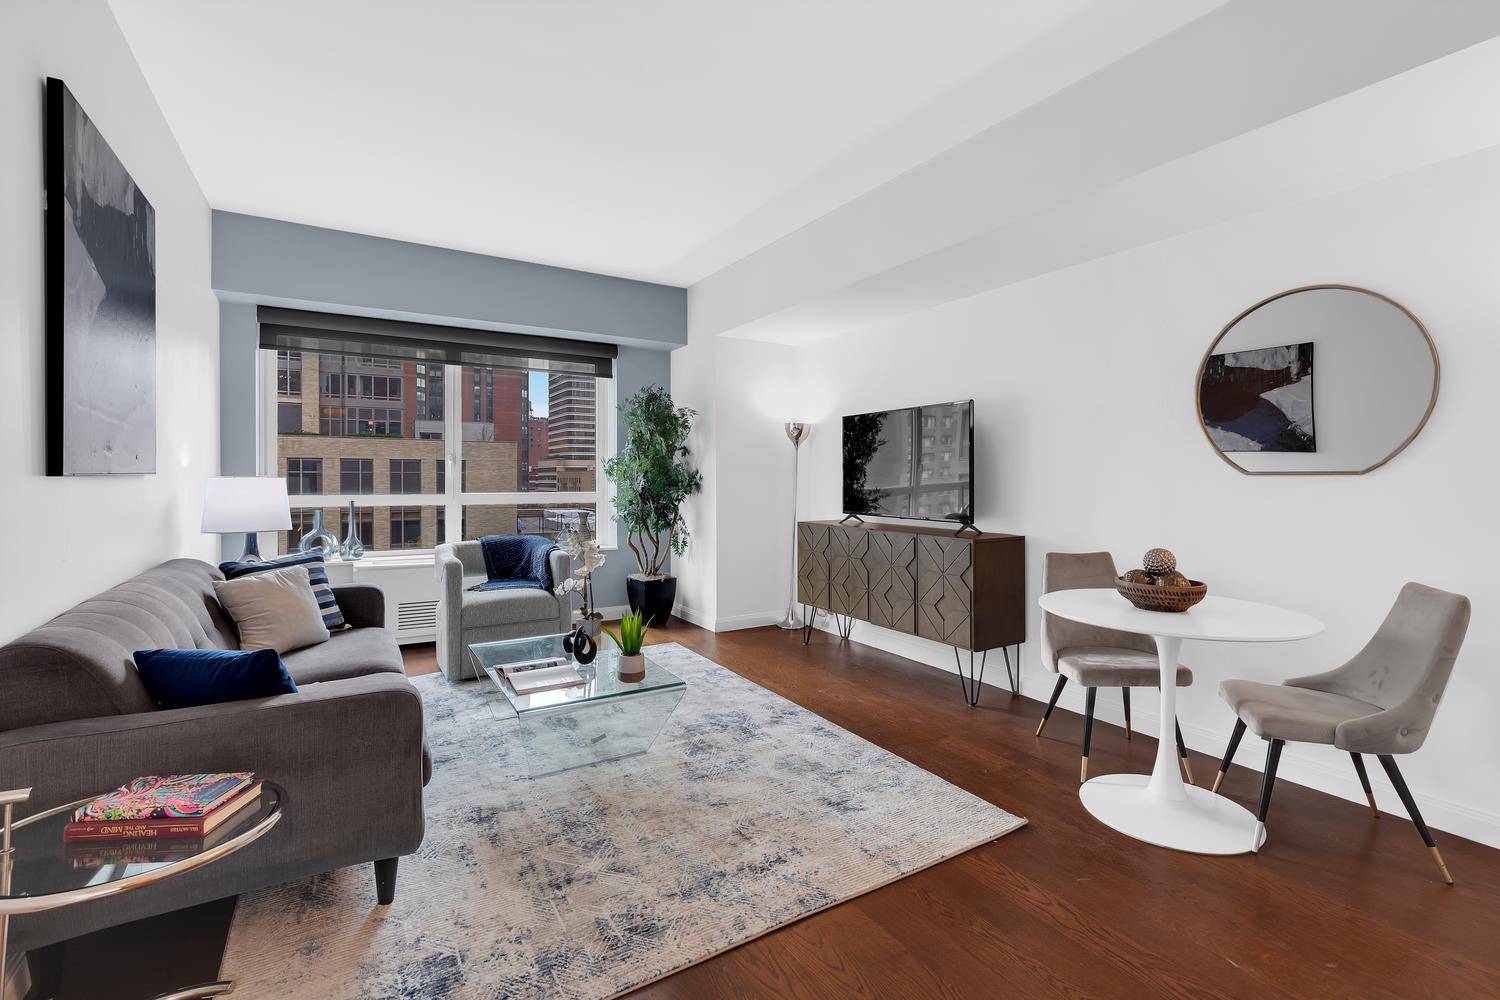 Introducing Apartment 719 at Carnegie Park, located at 200 East 94th Street, one of the most sought after condominiums on the Upper East Side.